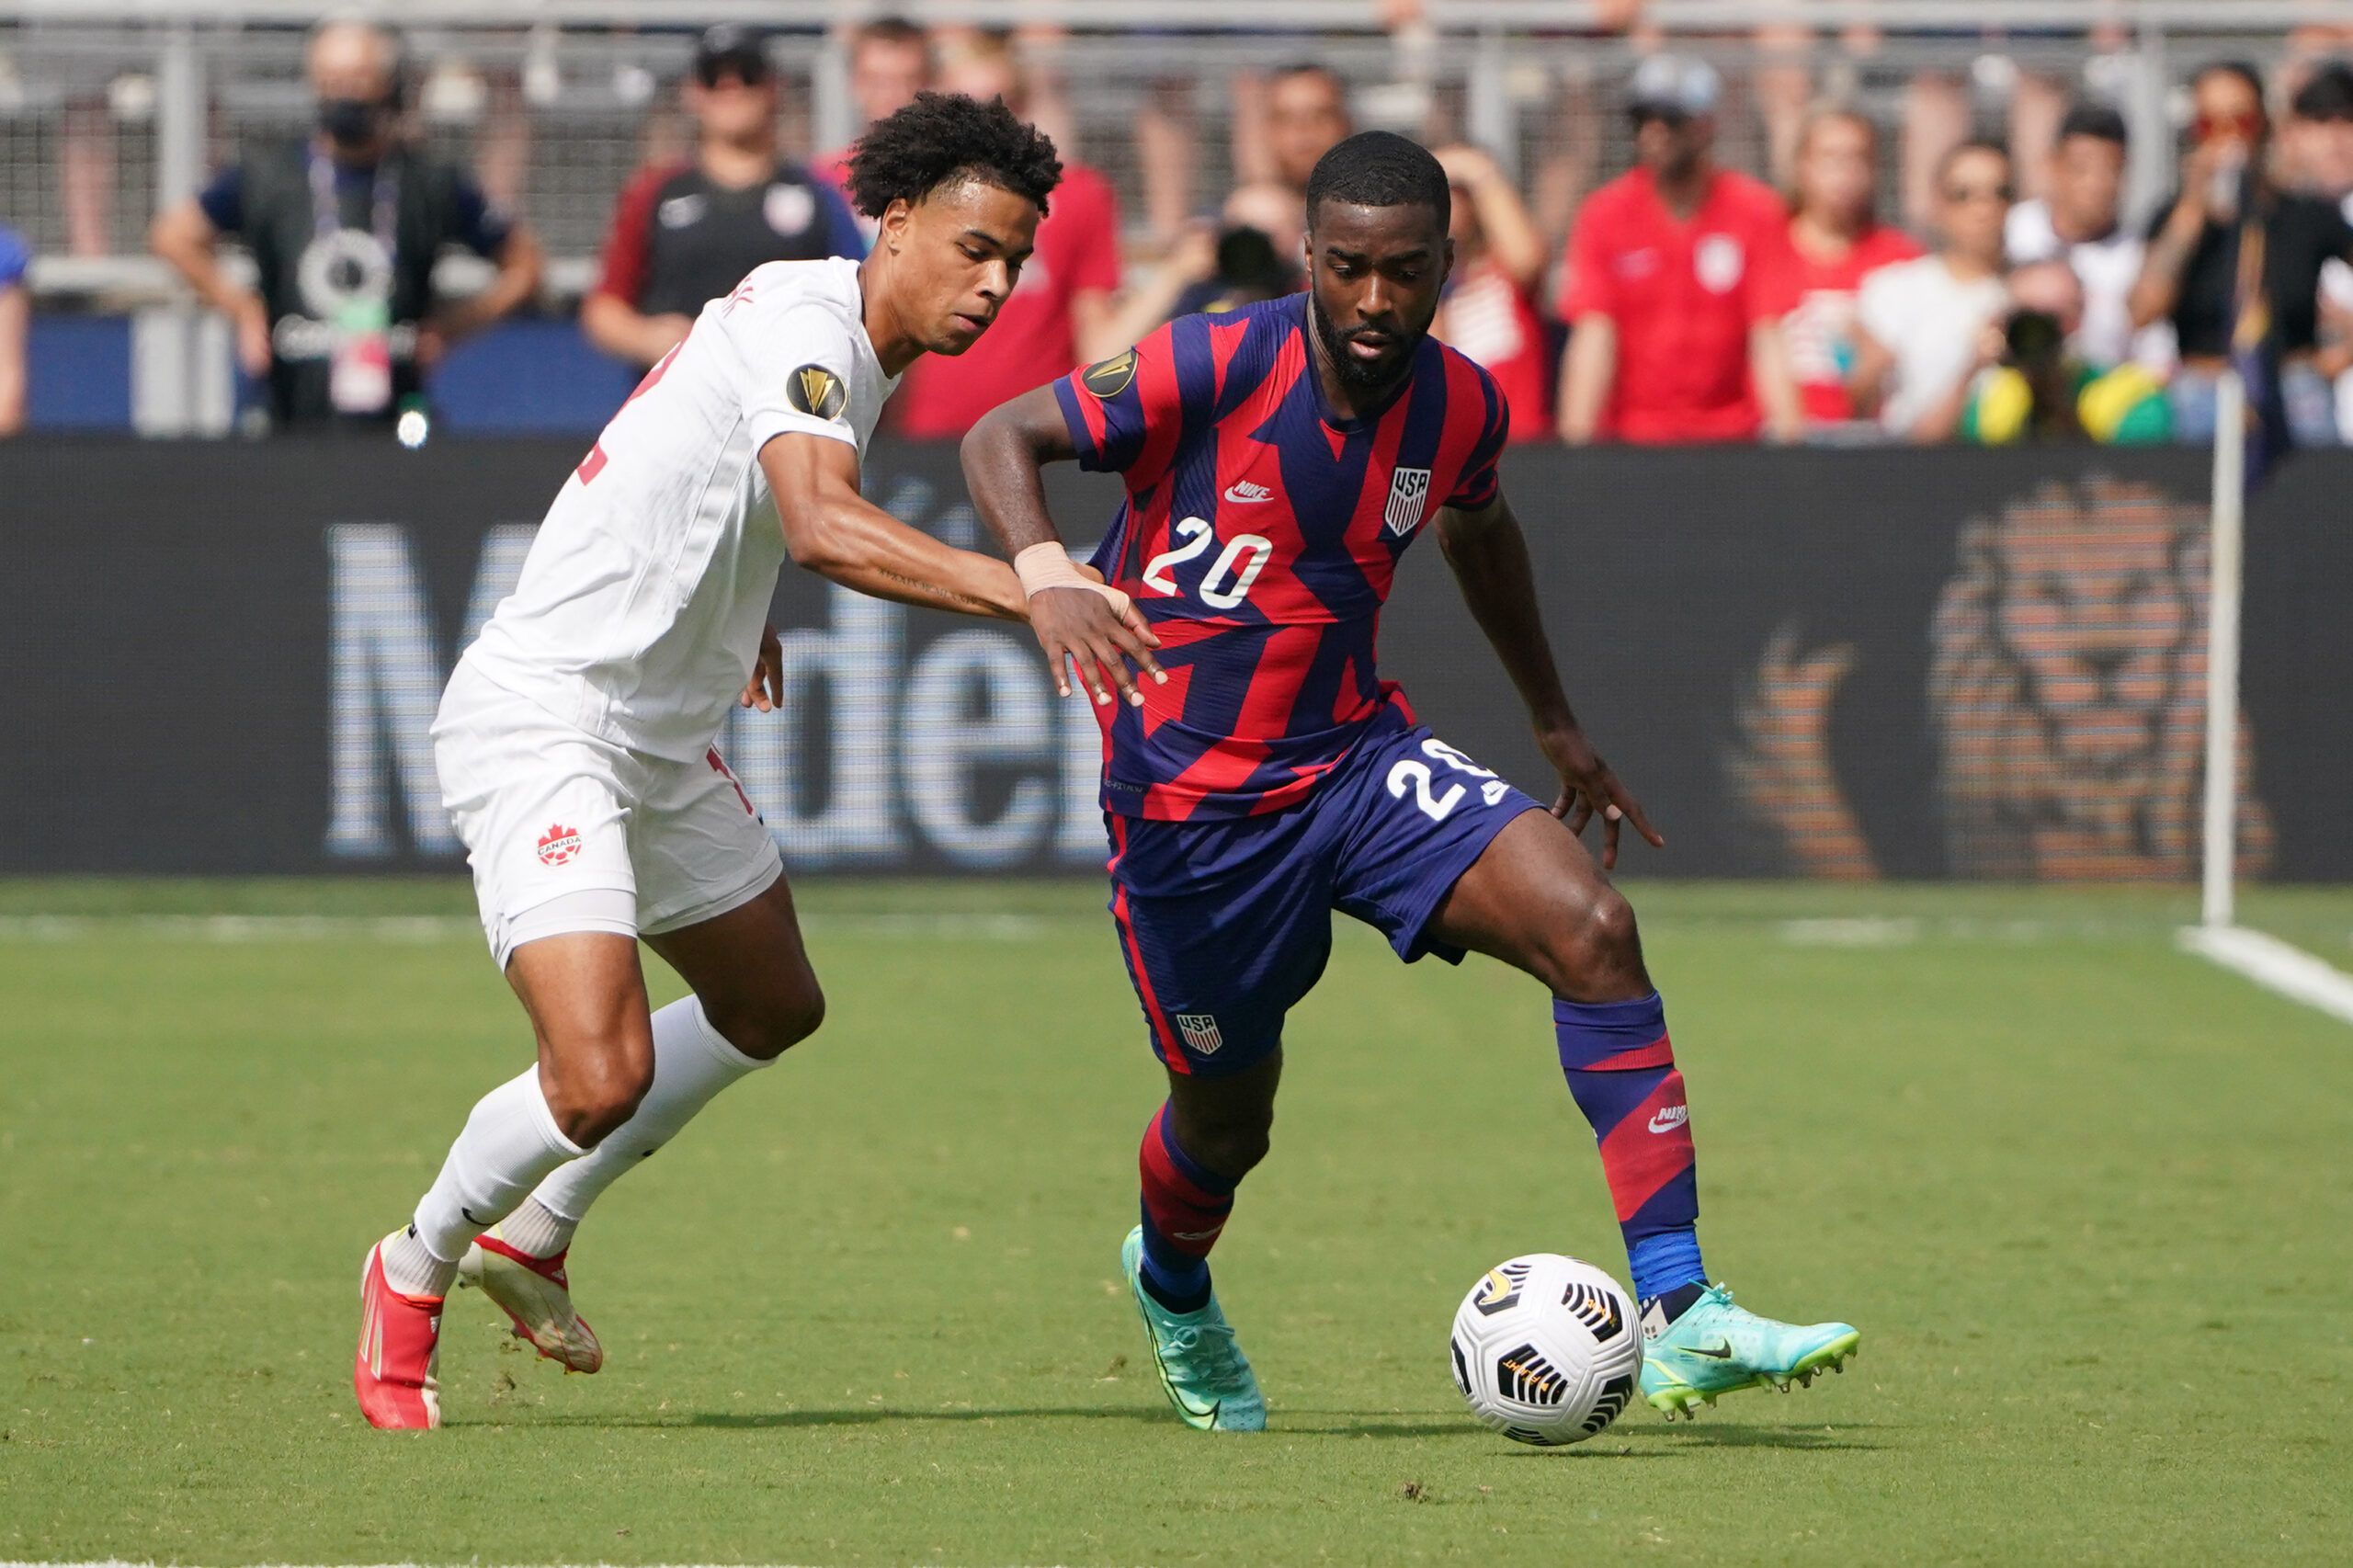 Jul 18, 2021; Kansas City, Kansas, USA; United States defender Shaq Moore (20) controls the ball as Canada forward Tajon Buchanan (12) defends during the CONCACAF Gold Cup Soccer group stage play at Children's Mercy Park. Mandatory Credit: Denny Medley-USA TODAY Sports